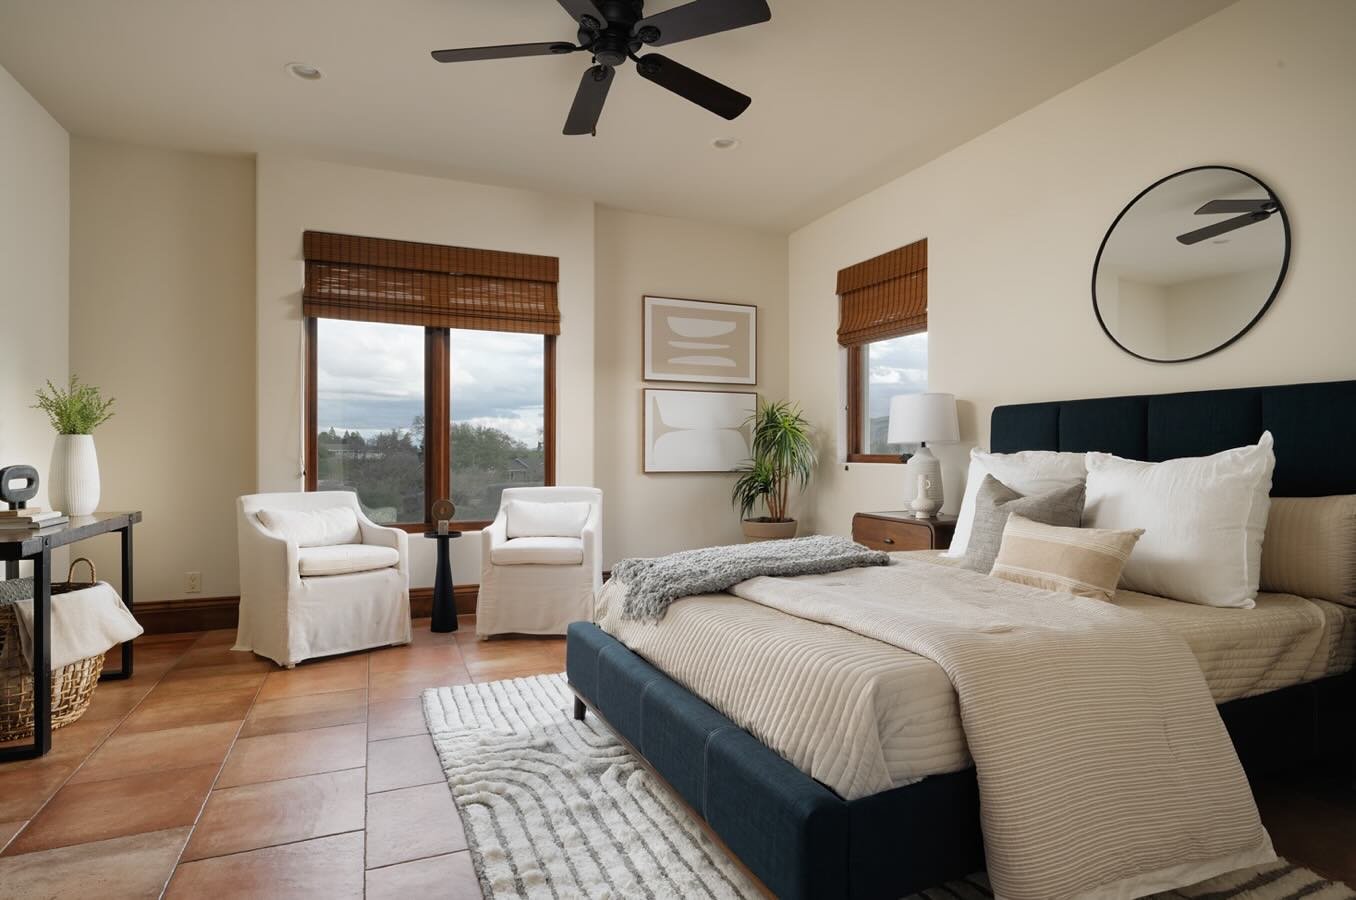 When this is your guest house&hellip; imagine your main house.

Just think, all you need is 1 friend with excellent taste and an enviable house-hunting budget and this room could be yours!

804 El Pintado, Danville, listed by @gwynngroup &amp; beauti